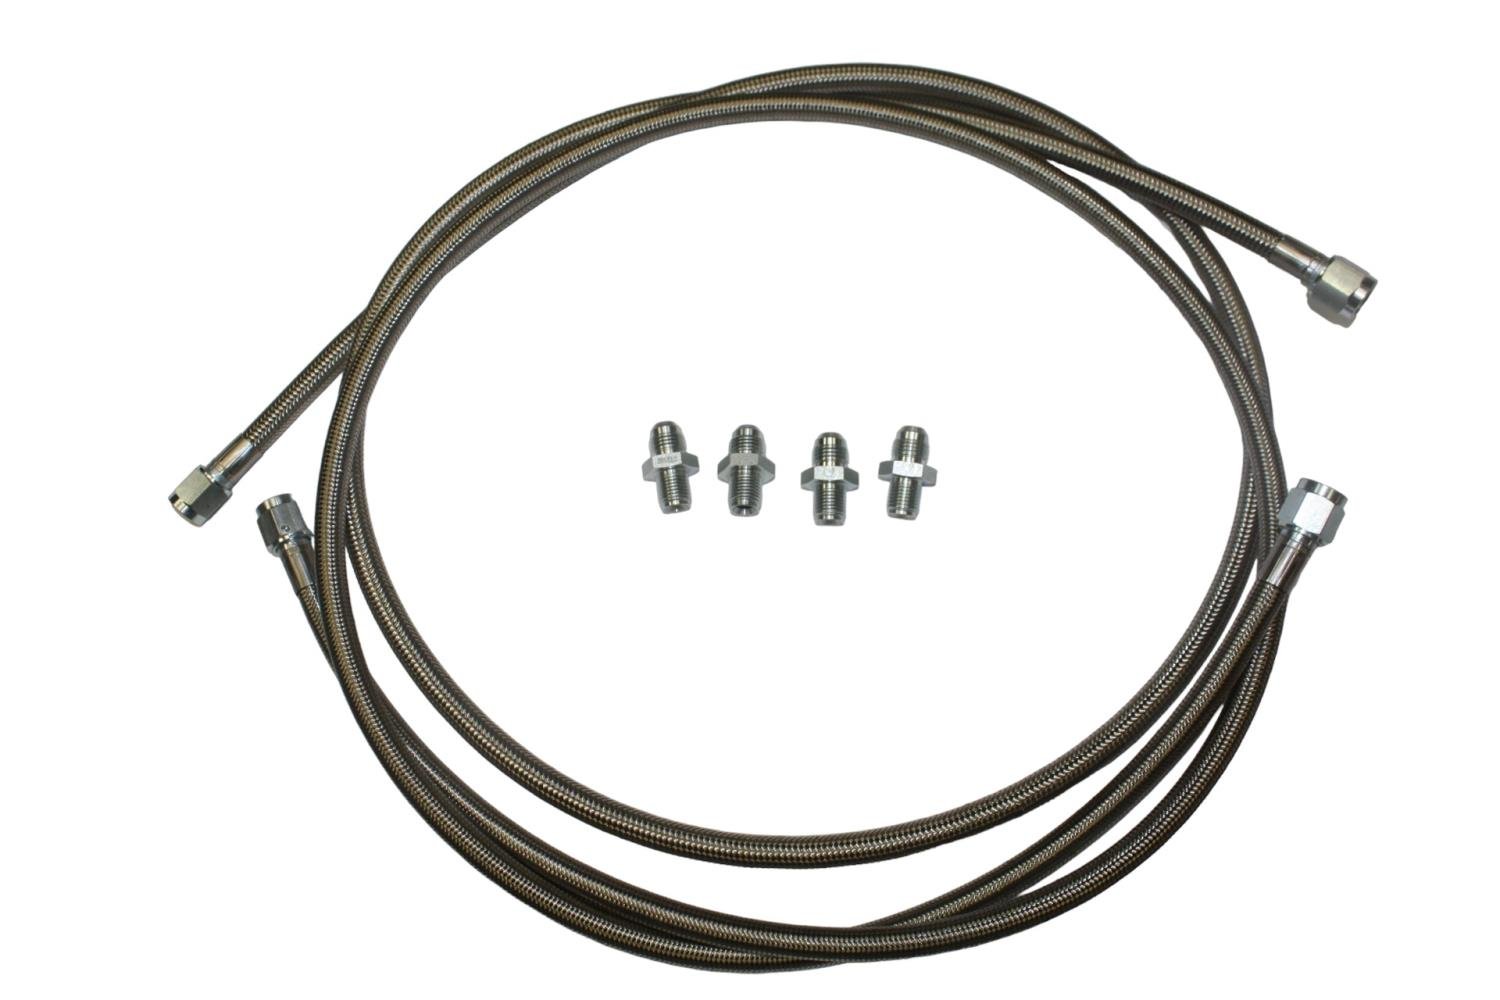 23-1501-60 Automatic Transmission Cooler Lines for TH350, TH400,